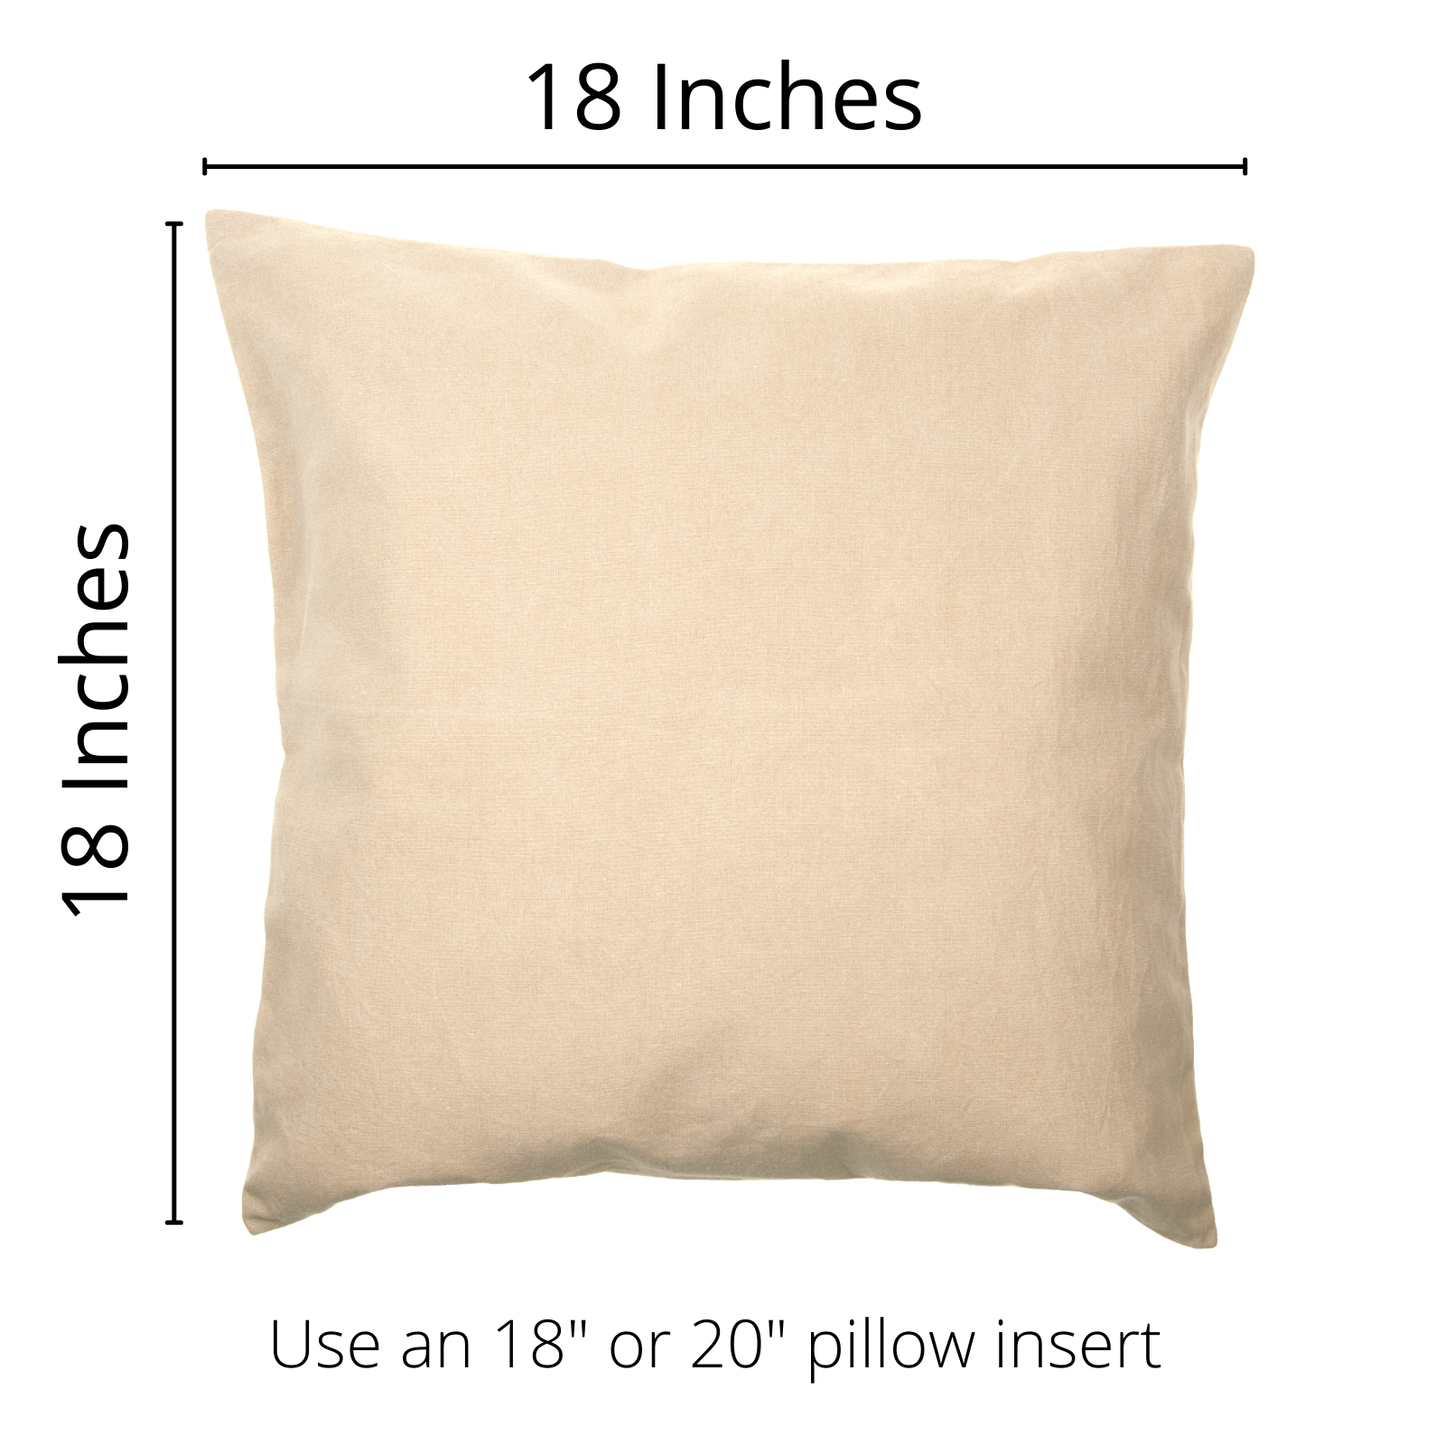 Personalized Pledge of Allegiance Pillow Cover